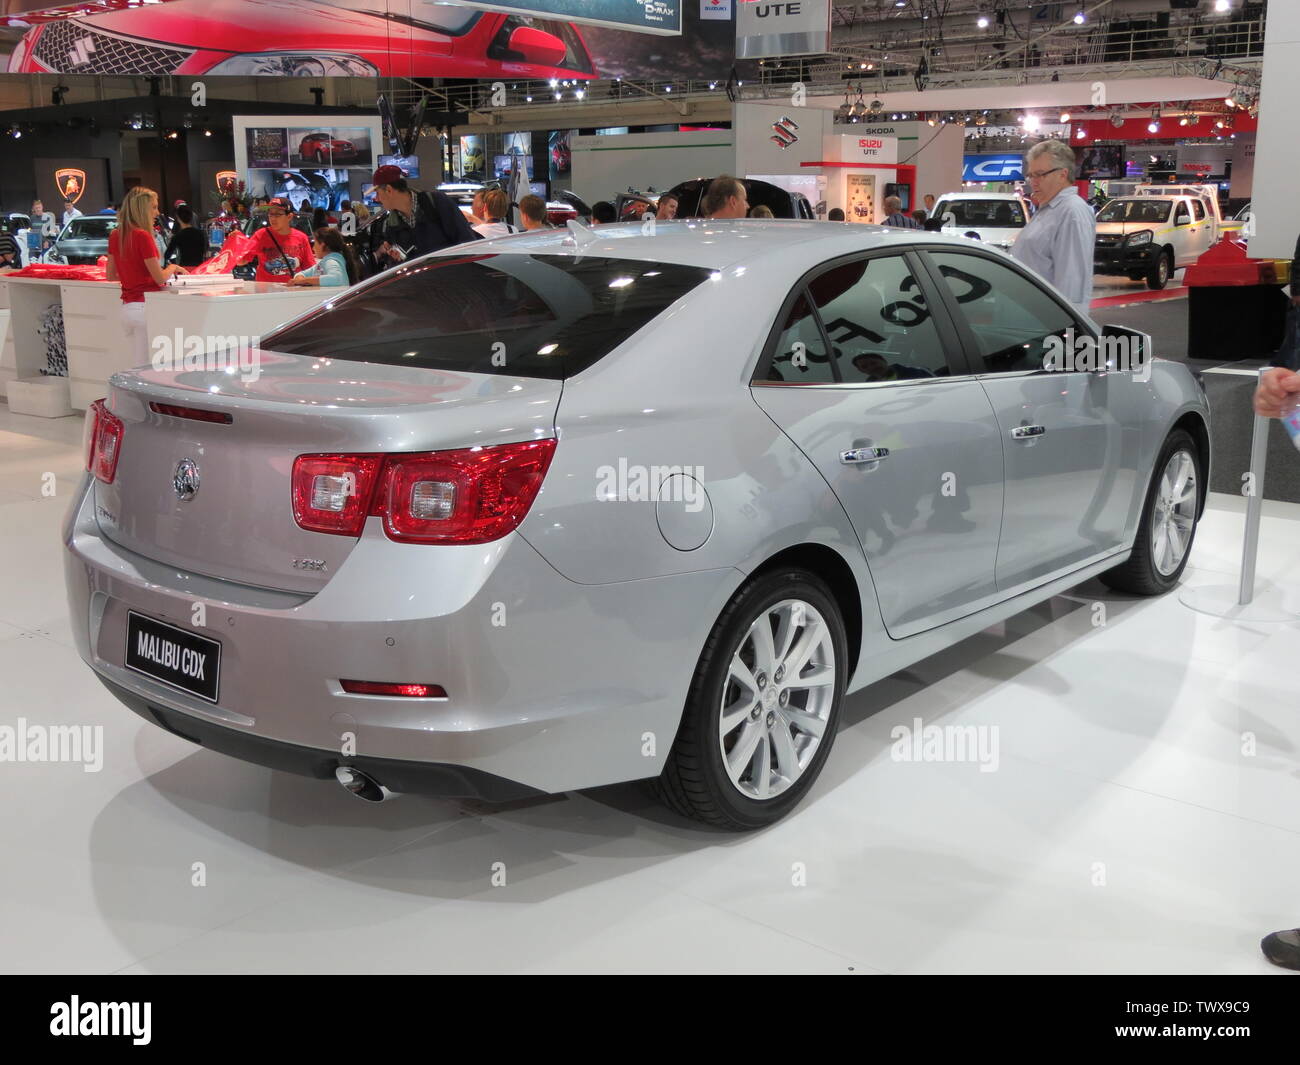 2012 Holden Malibu (EM) CDX sedan. This is a pre-production model, the production model made its Australian sales debut in June 2013. Photographed at the 2012 Australian International Motor Show, Sydney, New South Wales. Australia.; 26 October 2012; Own work; OSX; Stock Photo